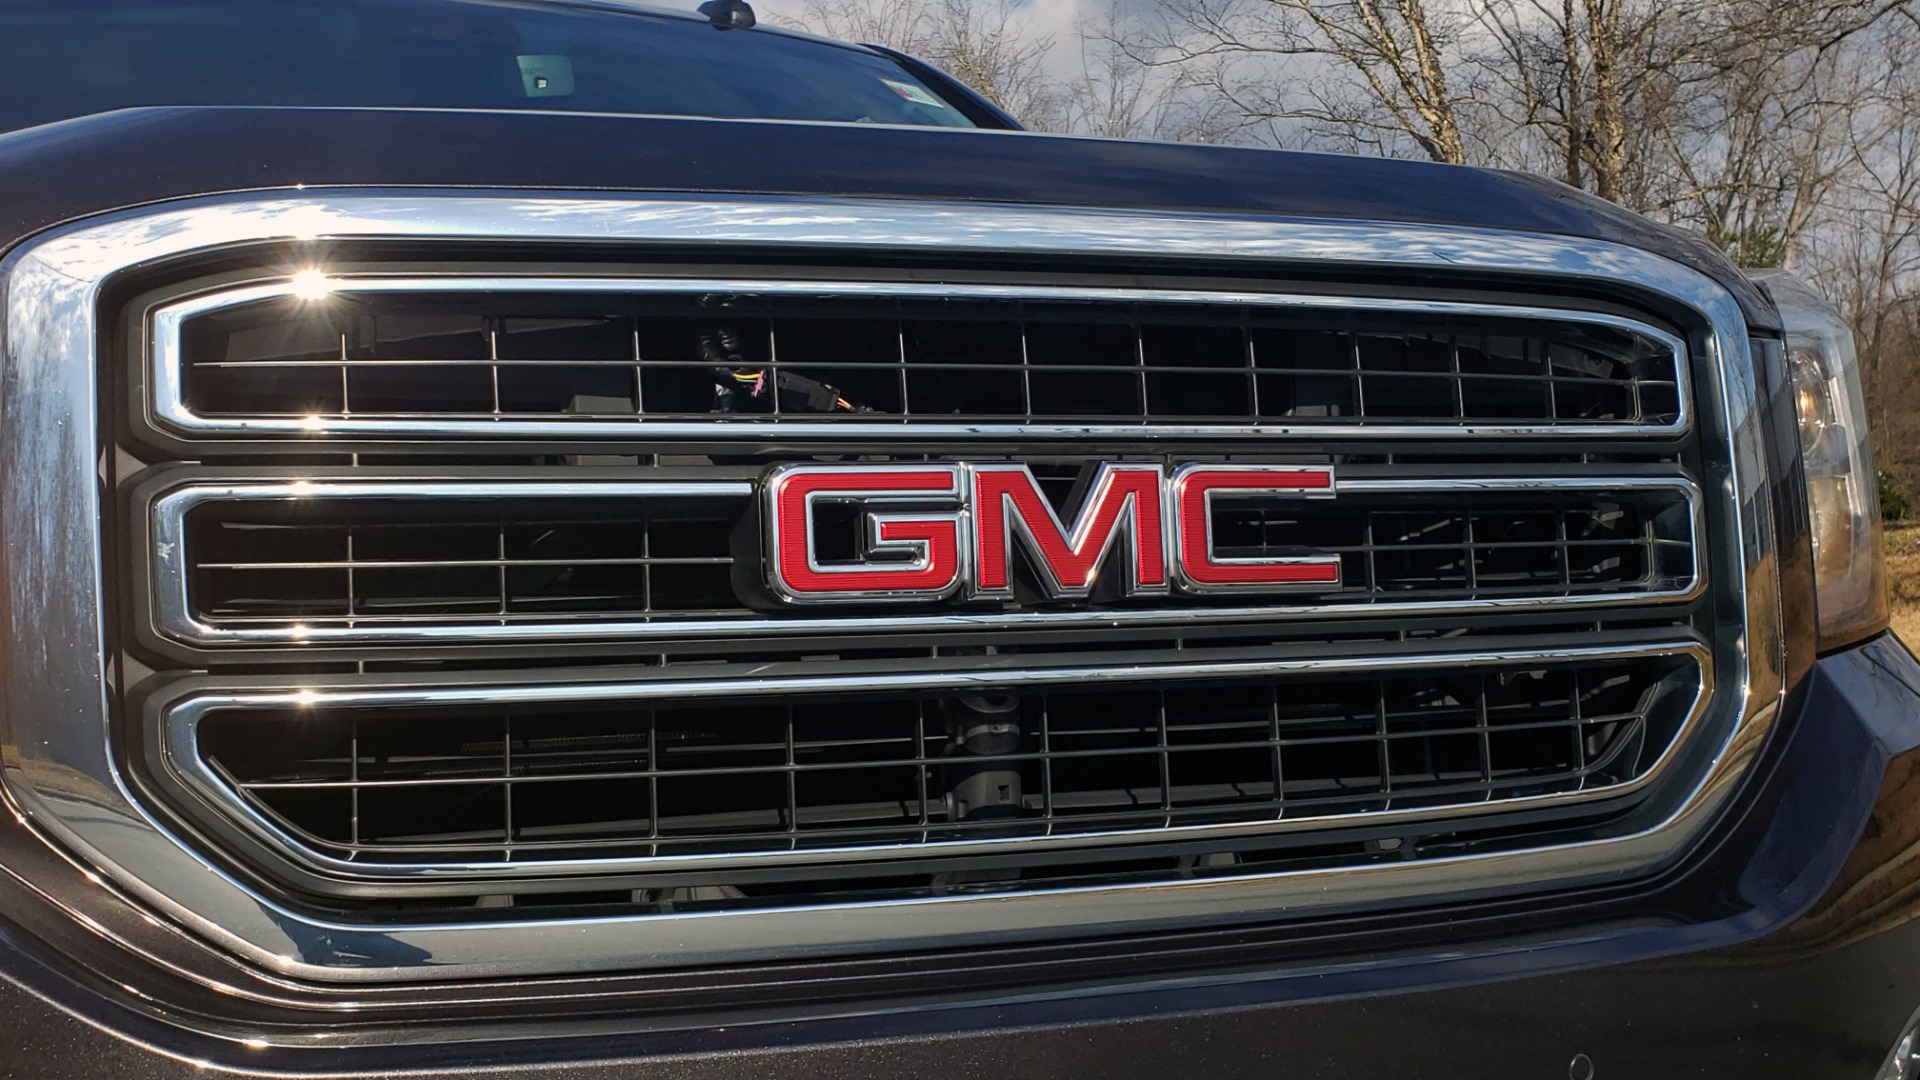 Used 2017 GMC YUKON XL SLT 4X4 / NAV / SUNROOF / BOSE / 3-ROW / REARVIEW for sale Sold at Formula Imports in Charlotte NC 28227 26